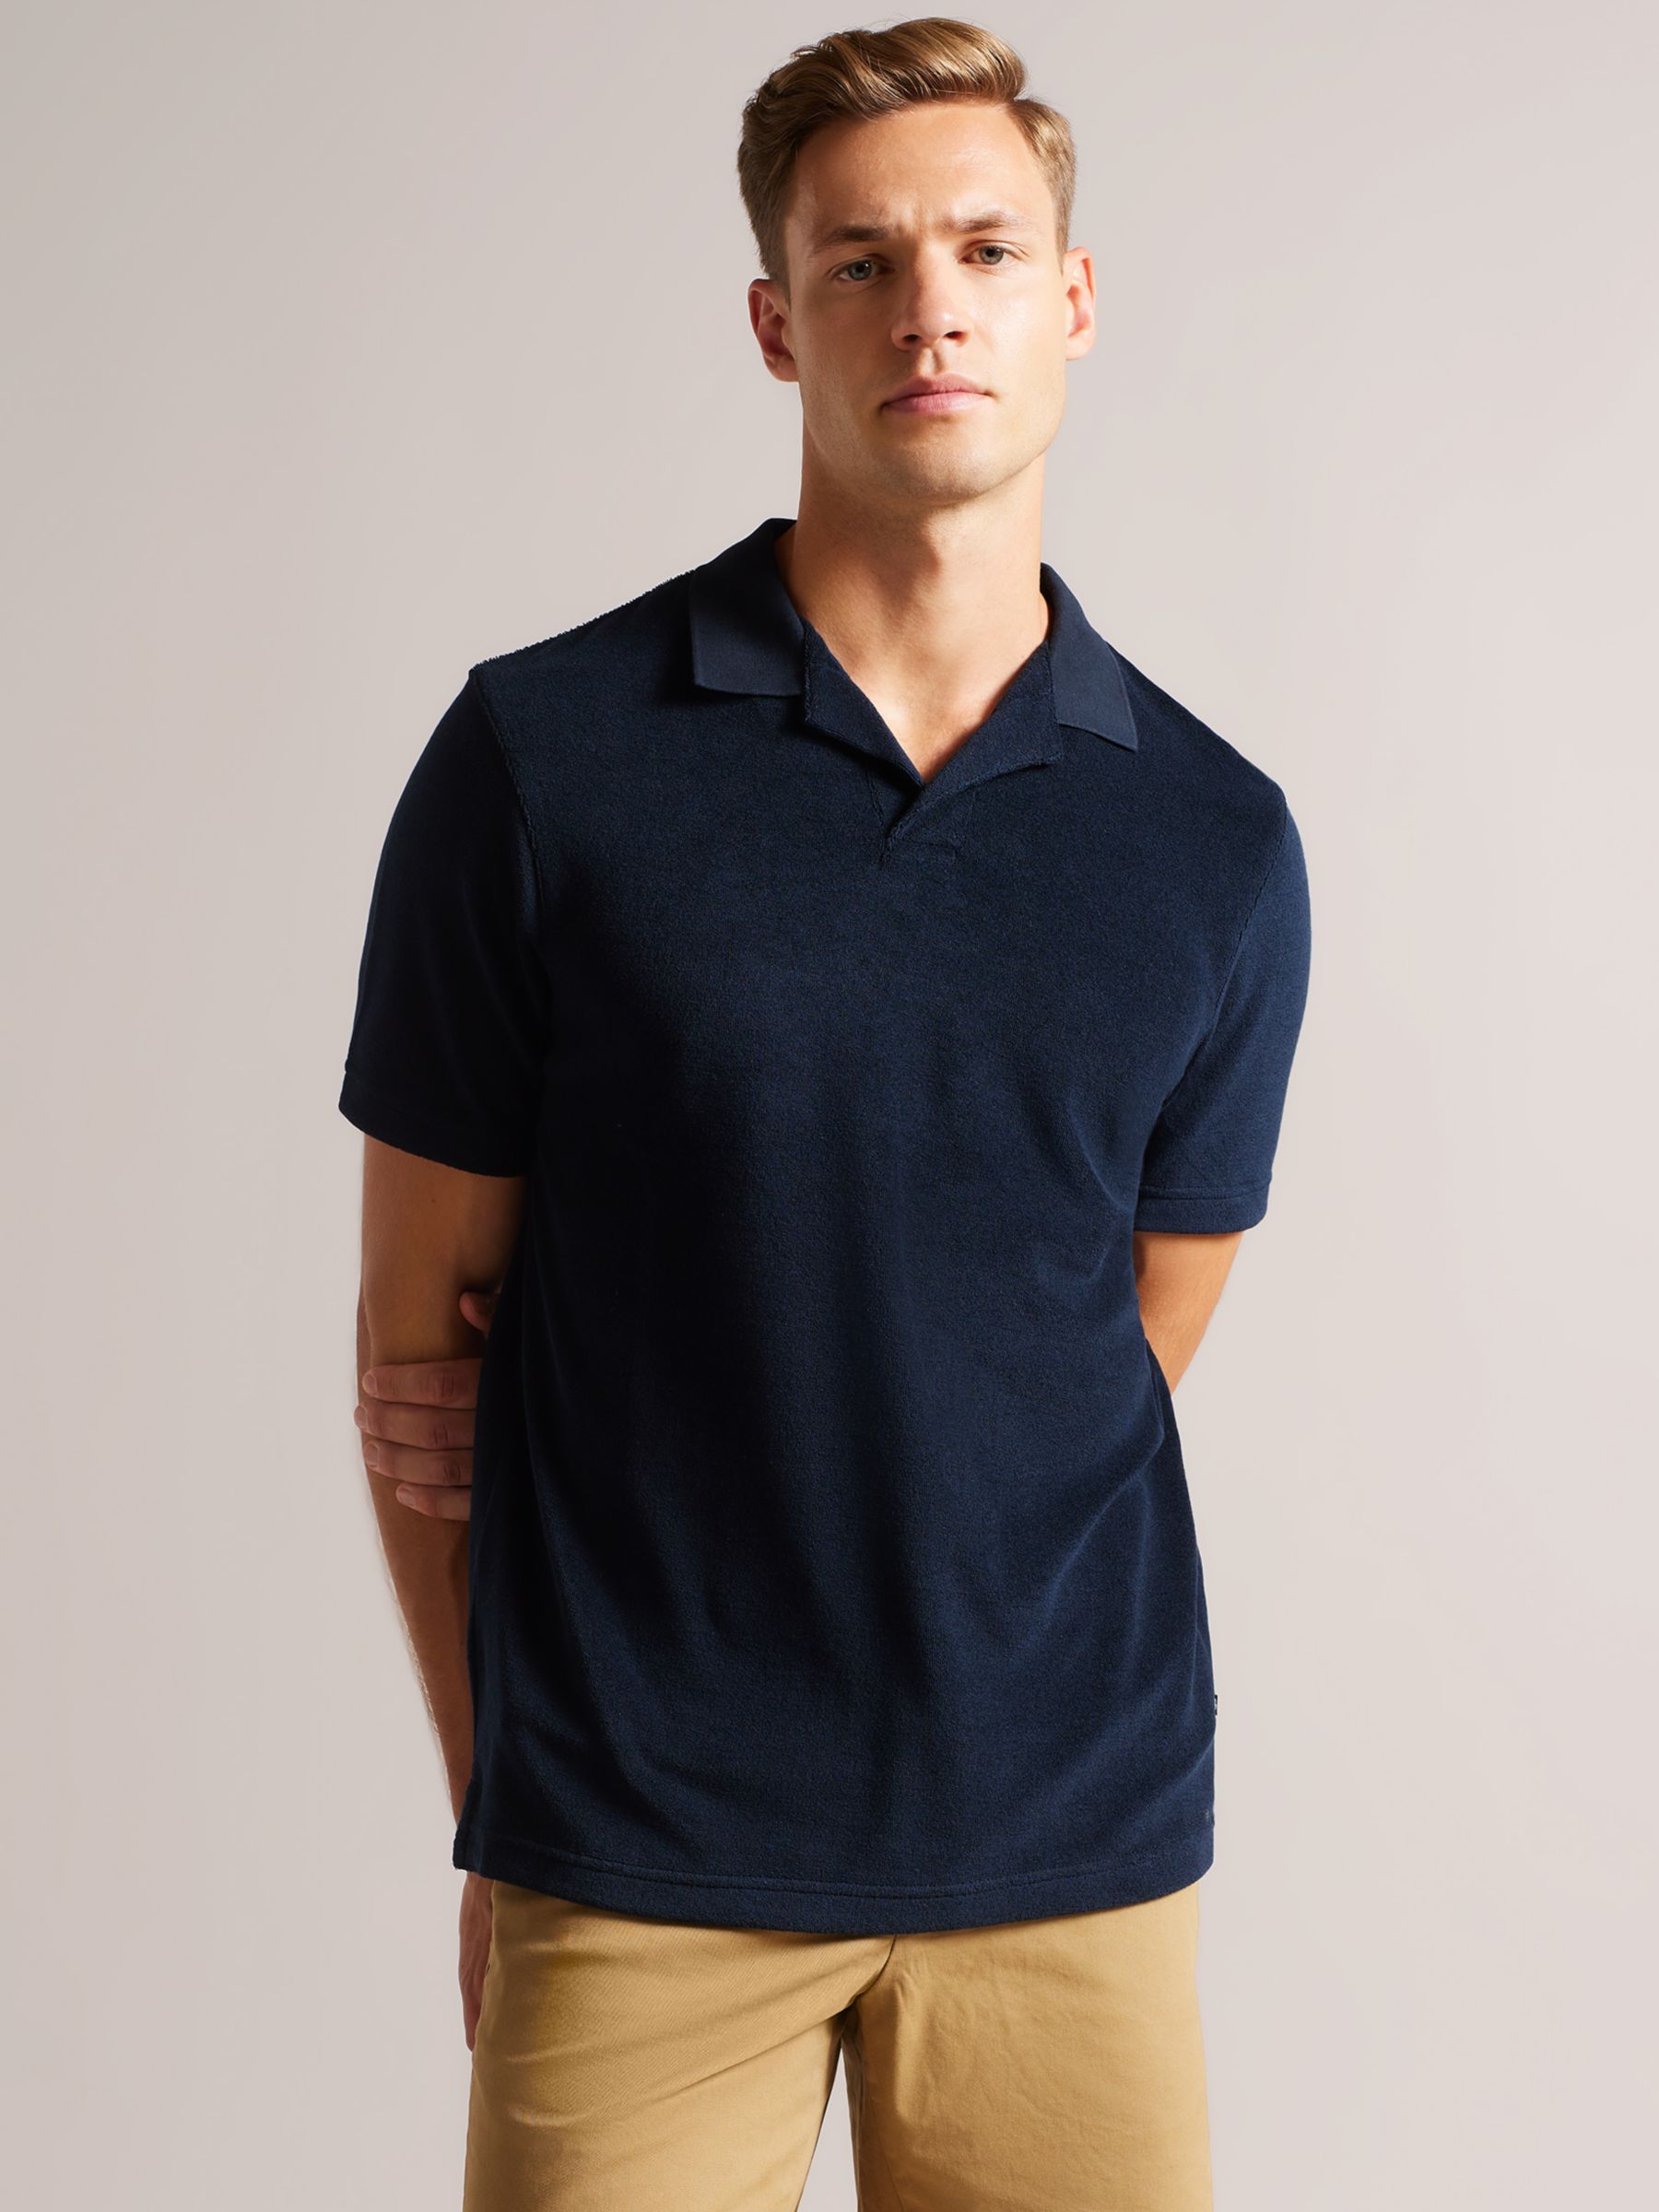 Ted Baker Short Sleeved Towelling Polo, Navy at John Lewis & Partners